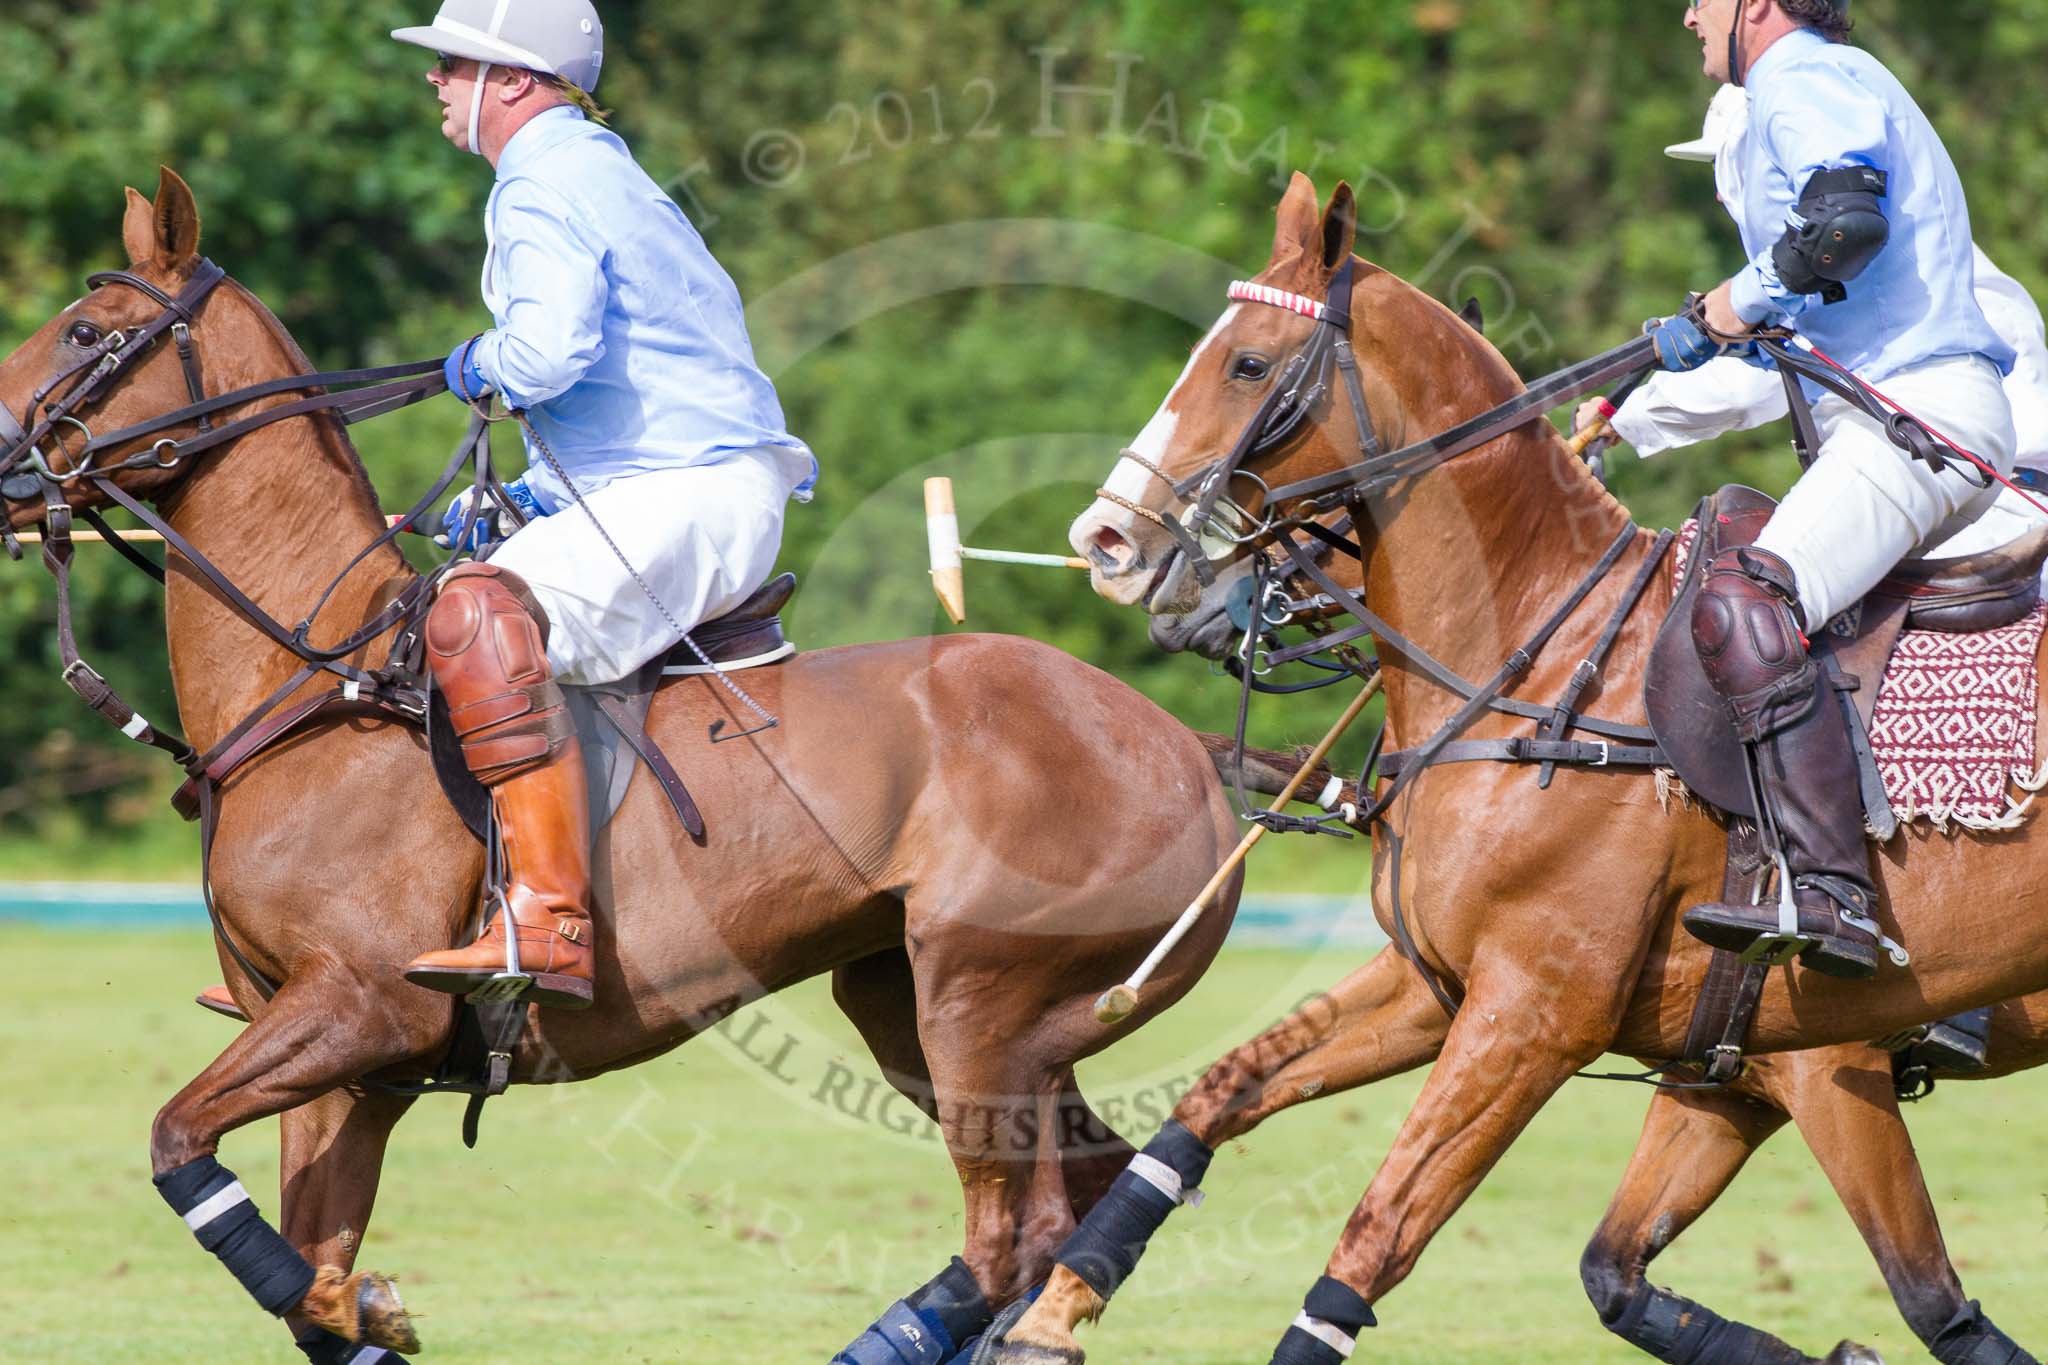 7th Heritage Polo Cup semi-finals: La Mariposa Argentina Polo Team..
Hurtwood Park Polo Club,
Ewhurst Green,
Surrey,
United Kingdom,
on 04 August 2012 at 16:49, image #328